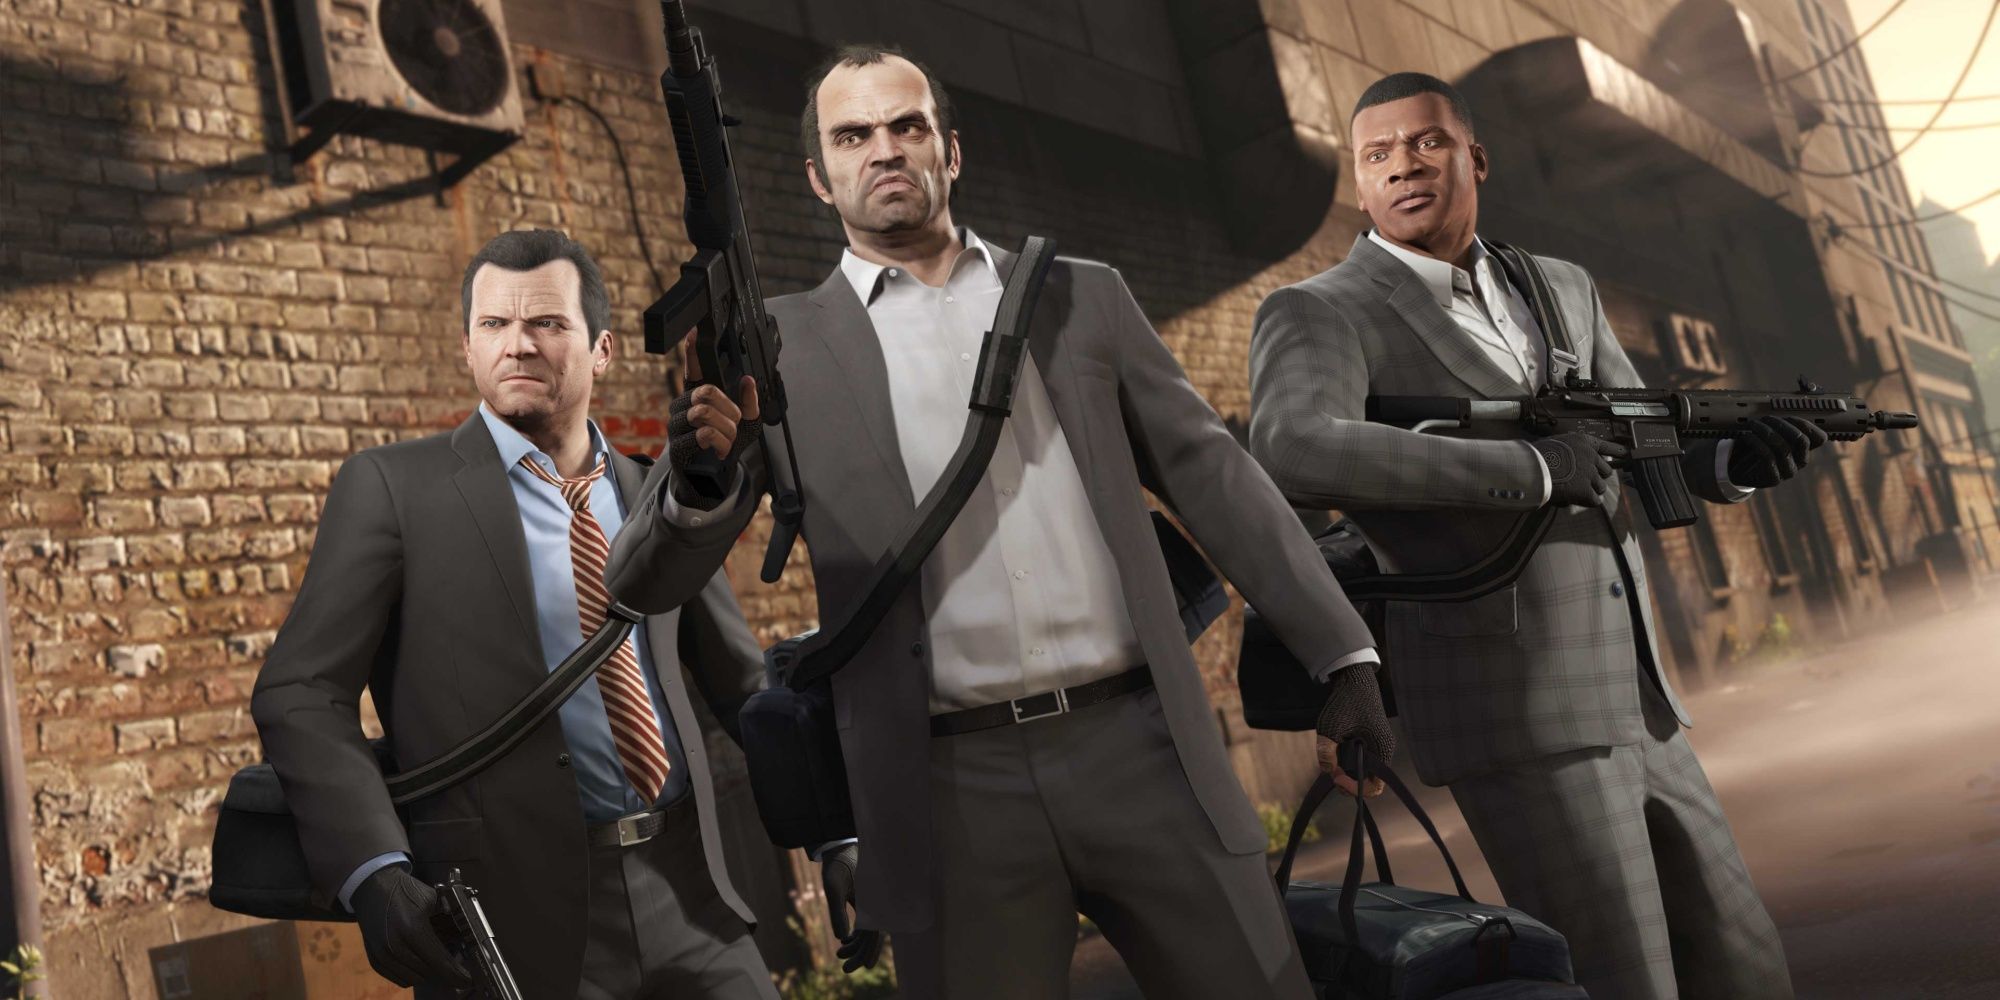 GTA 5 protagonists in suits with weapons and bags of money